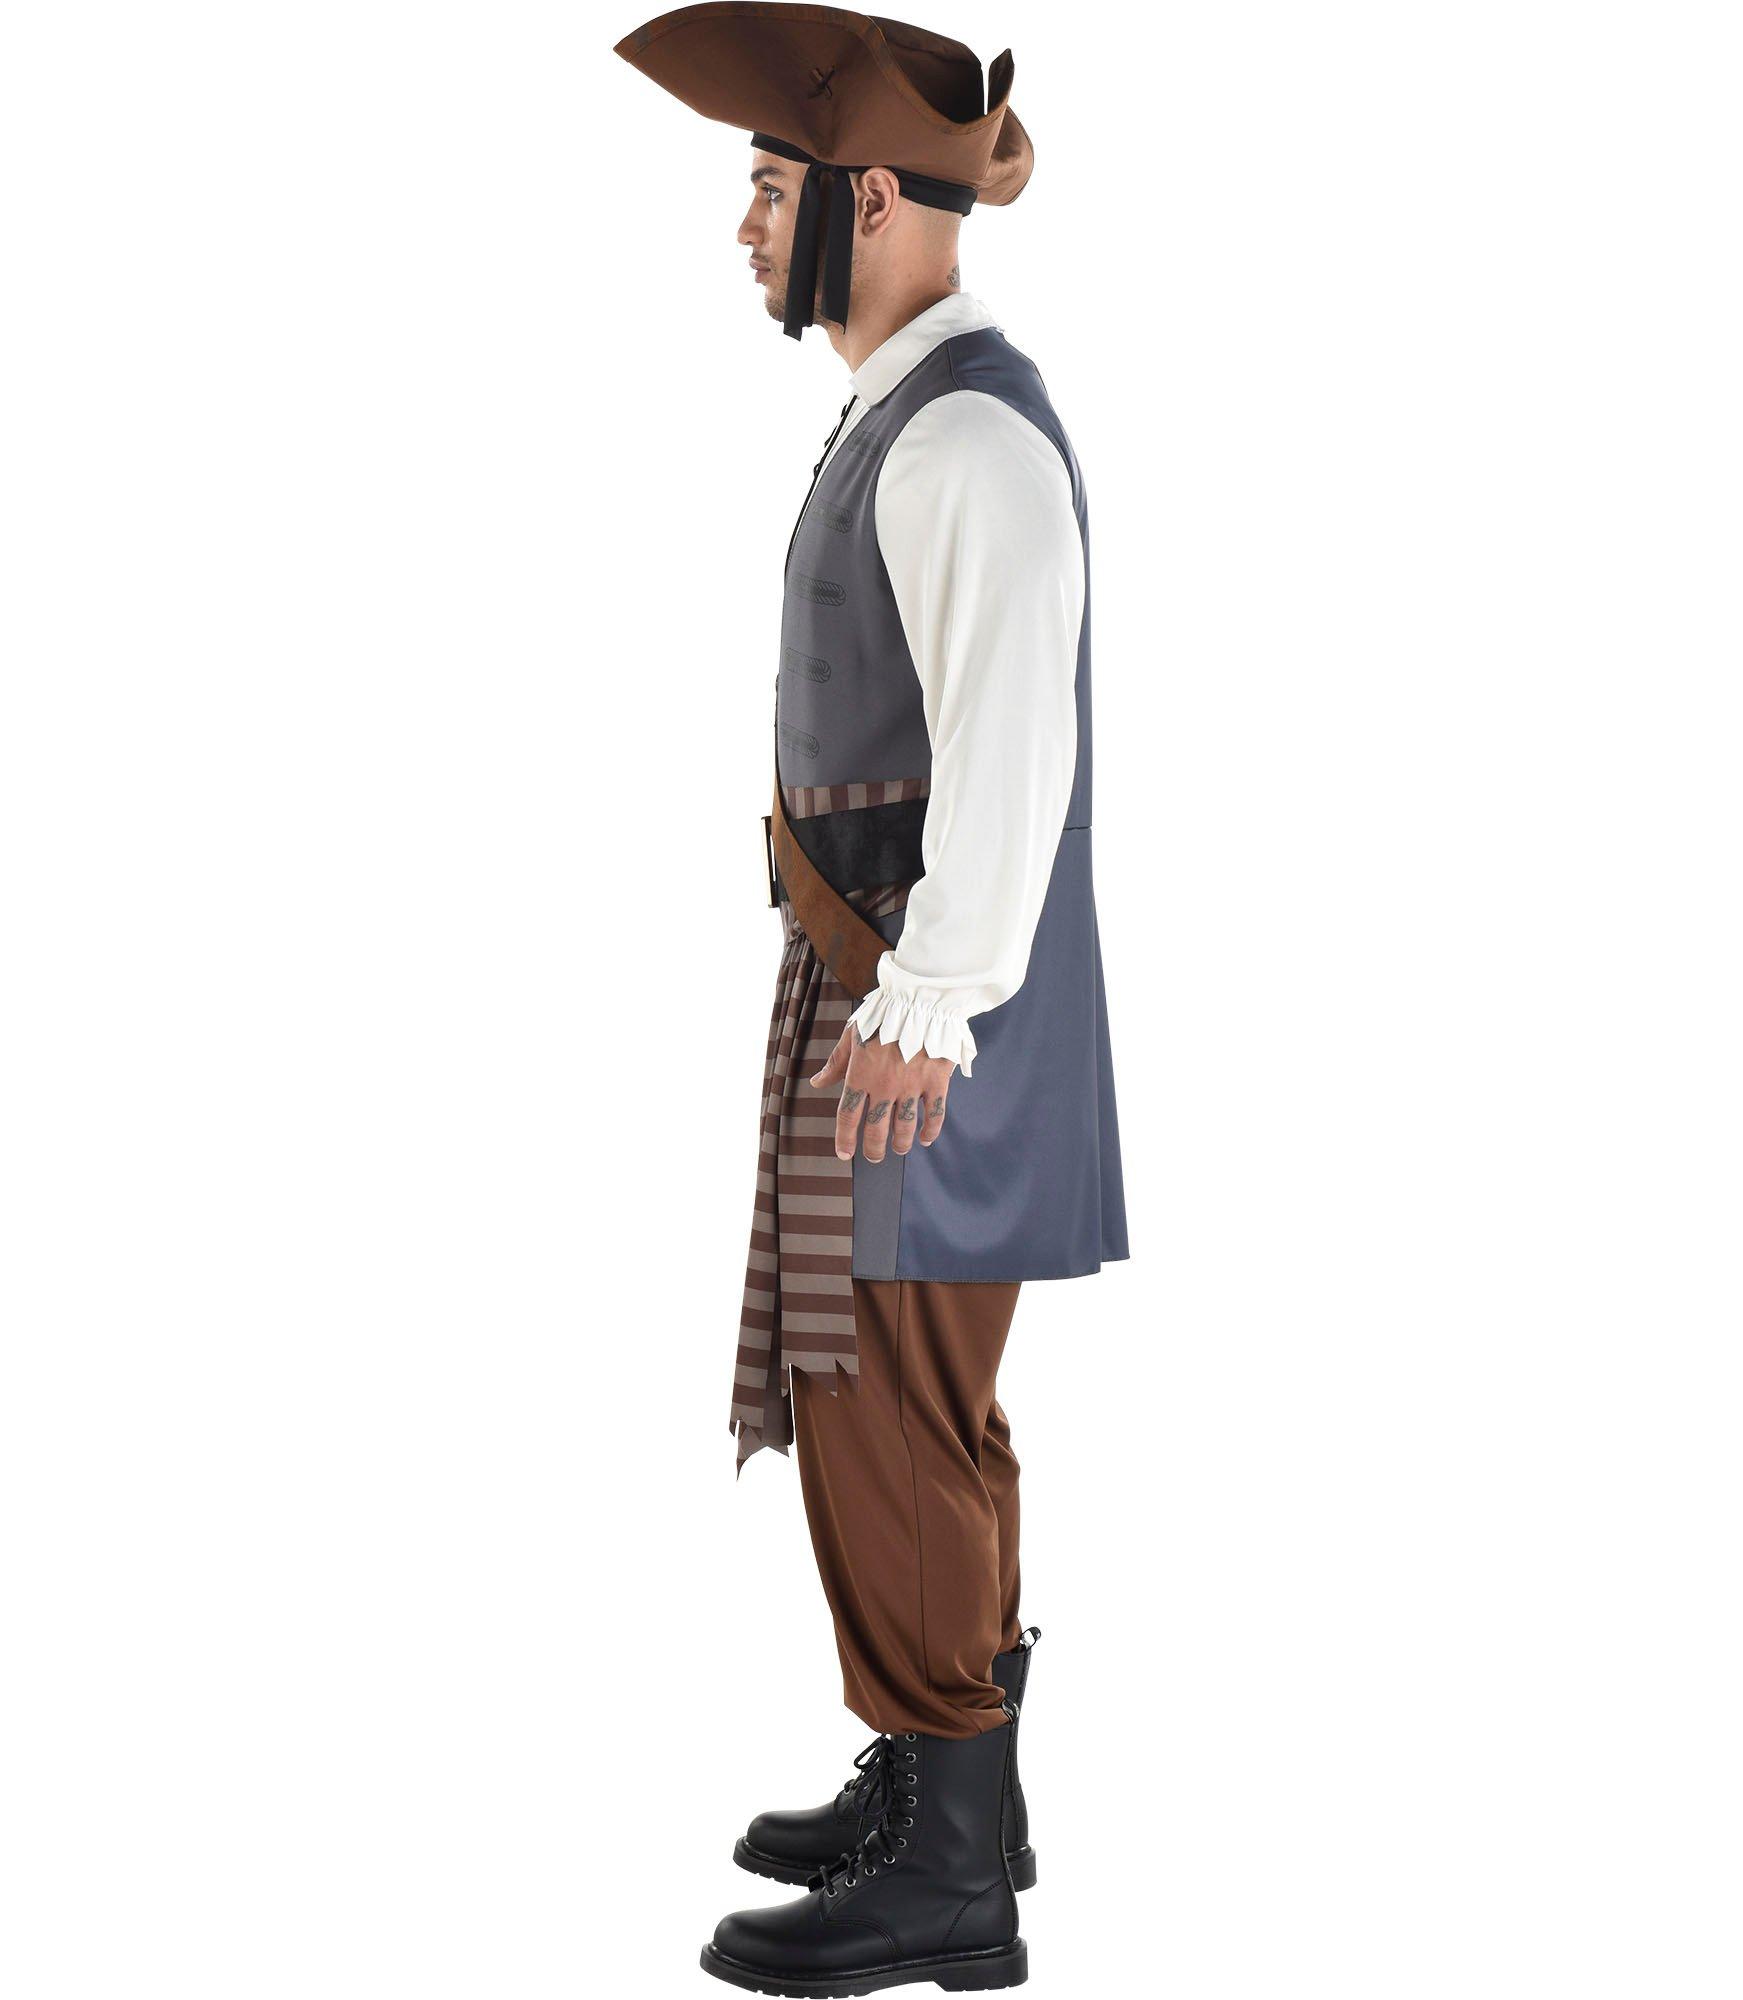 Adult Shiver Me Timbers Pirate Costume